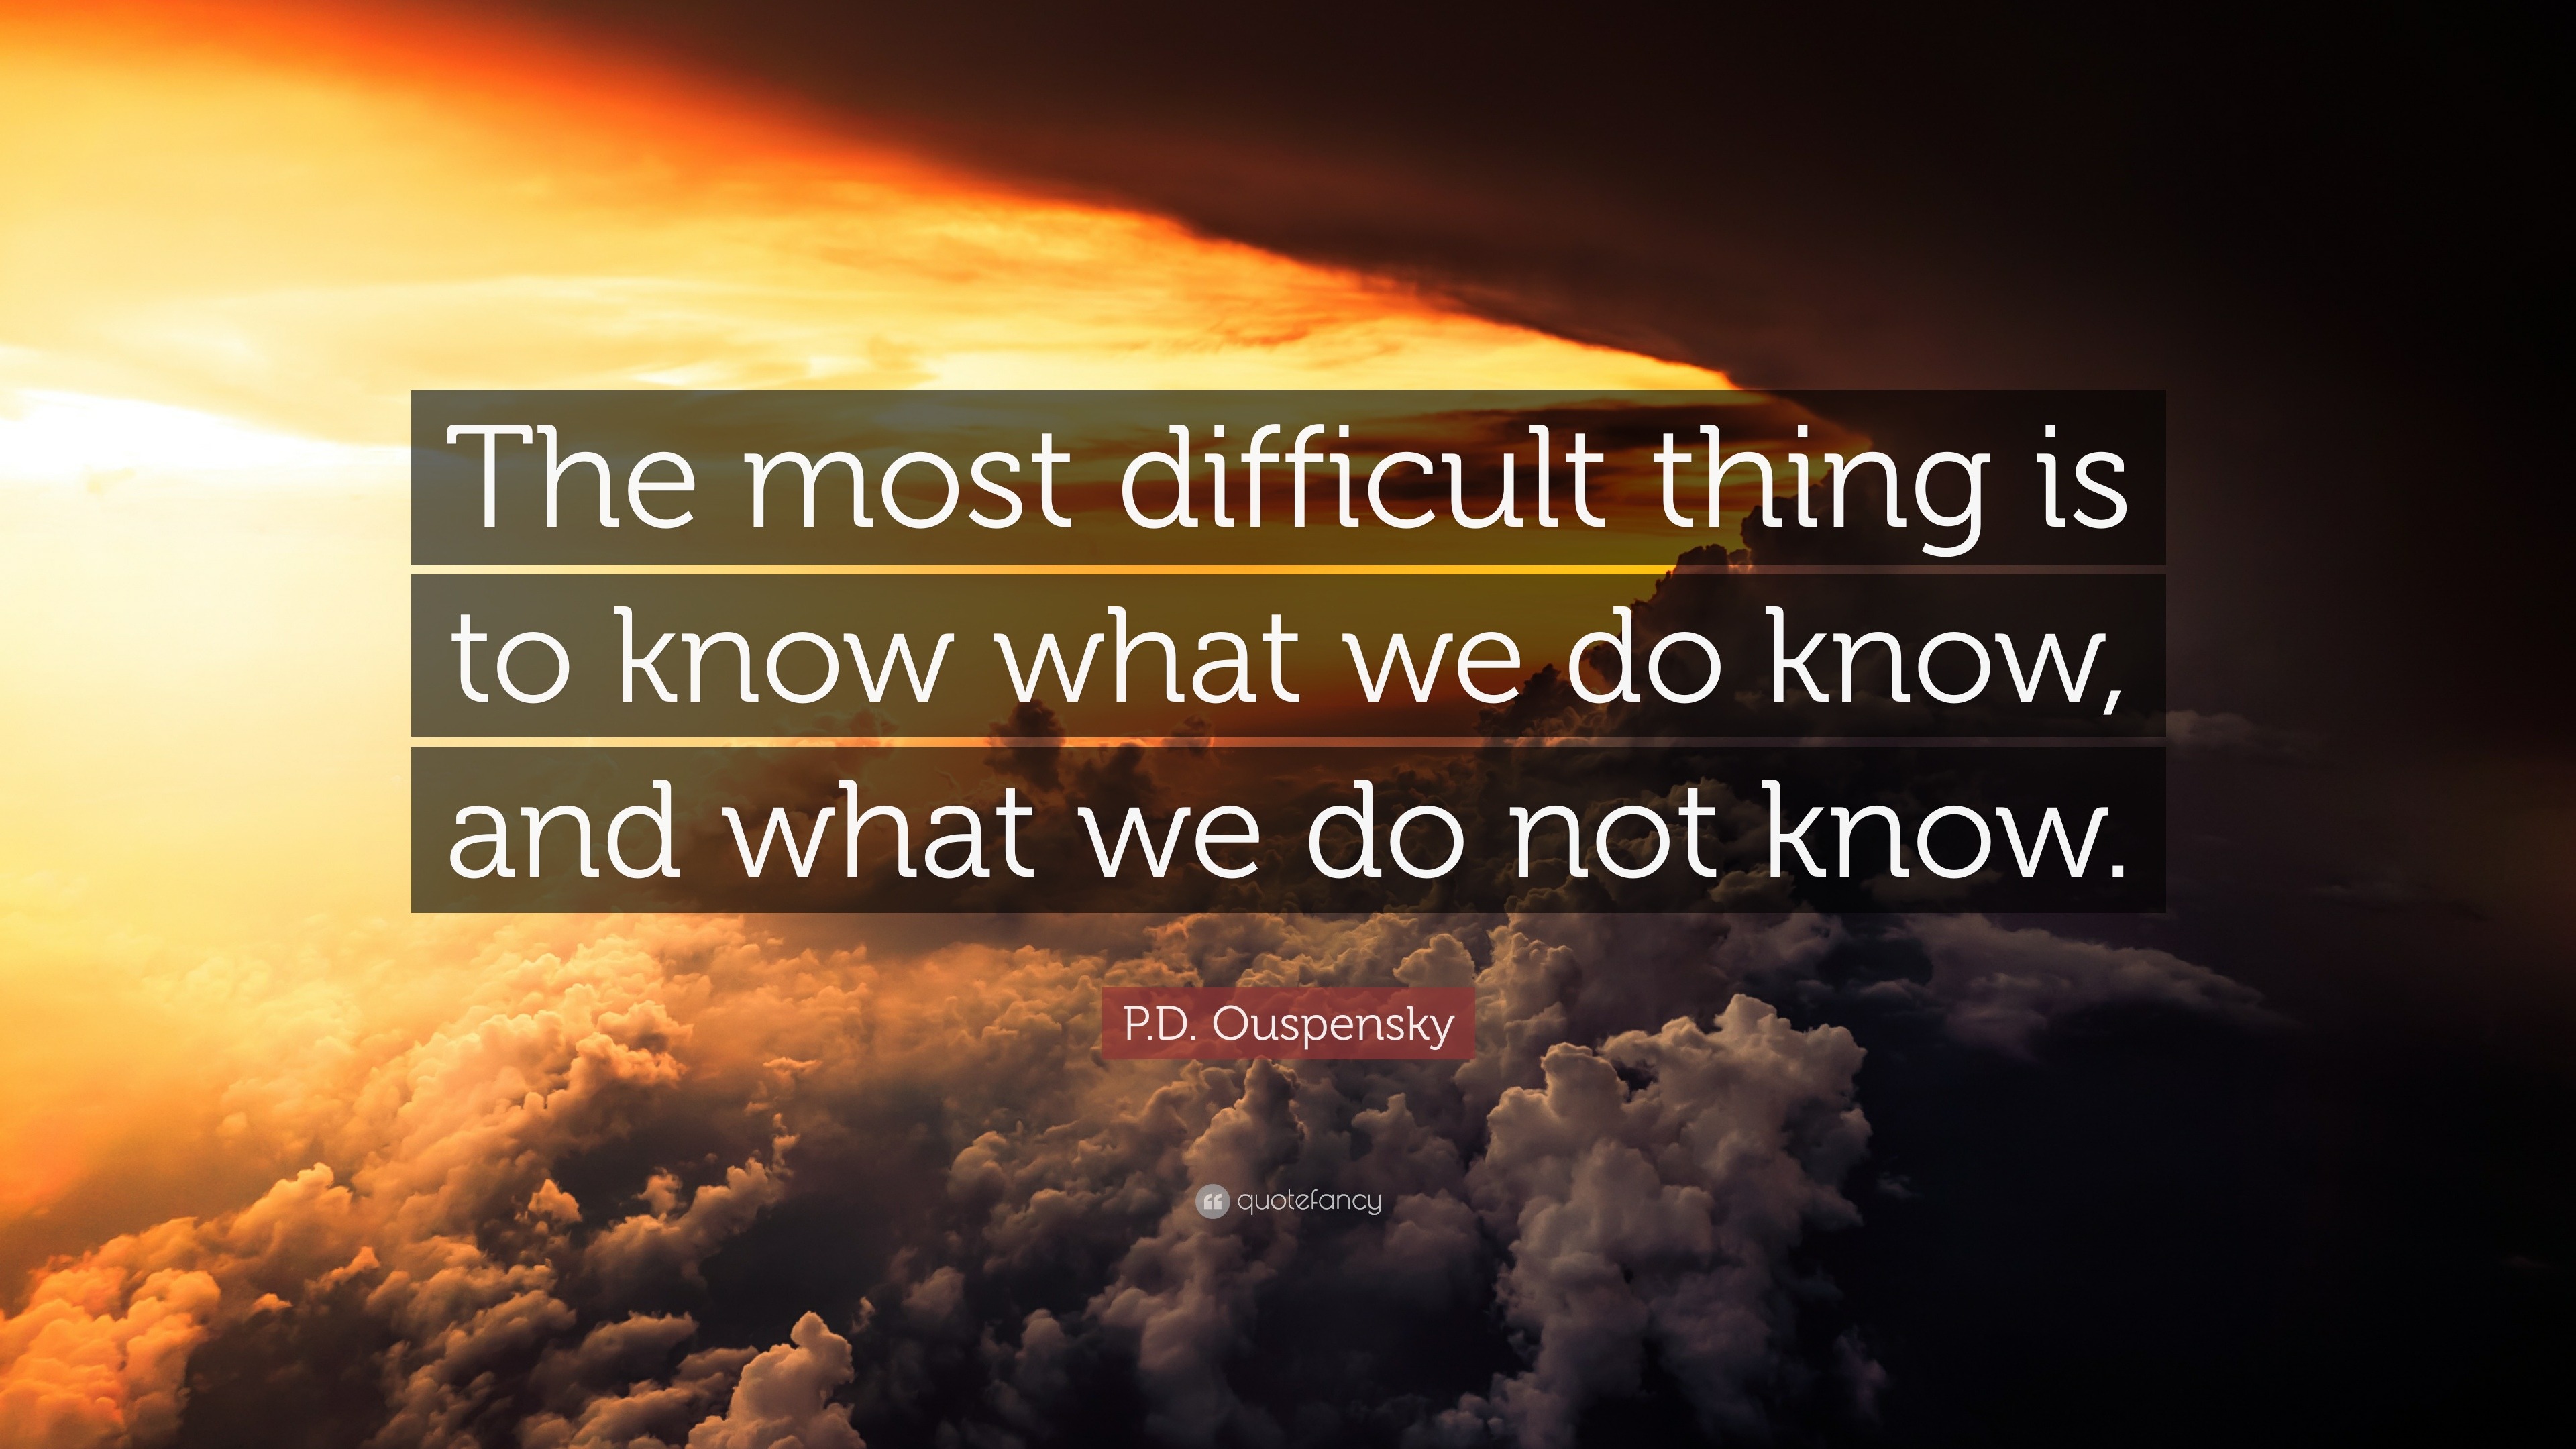 P.D. Ouspensky Quote: “The most difficult thing is to know what we do ...